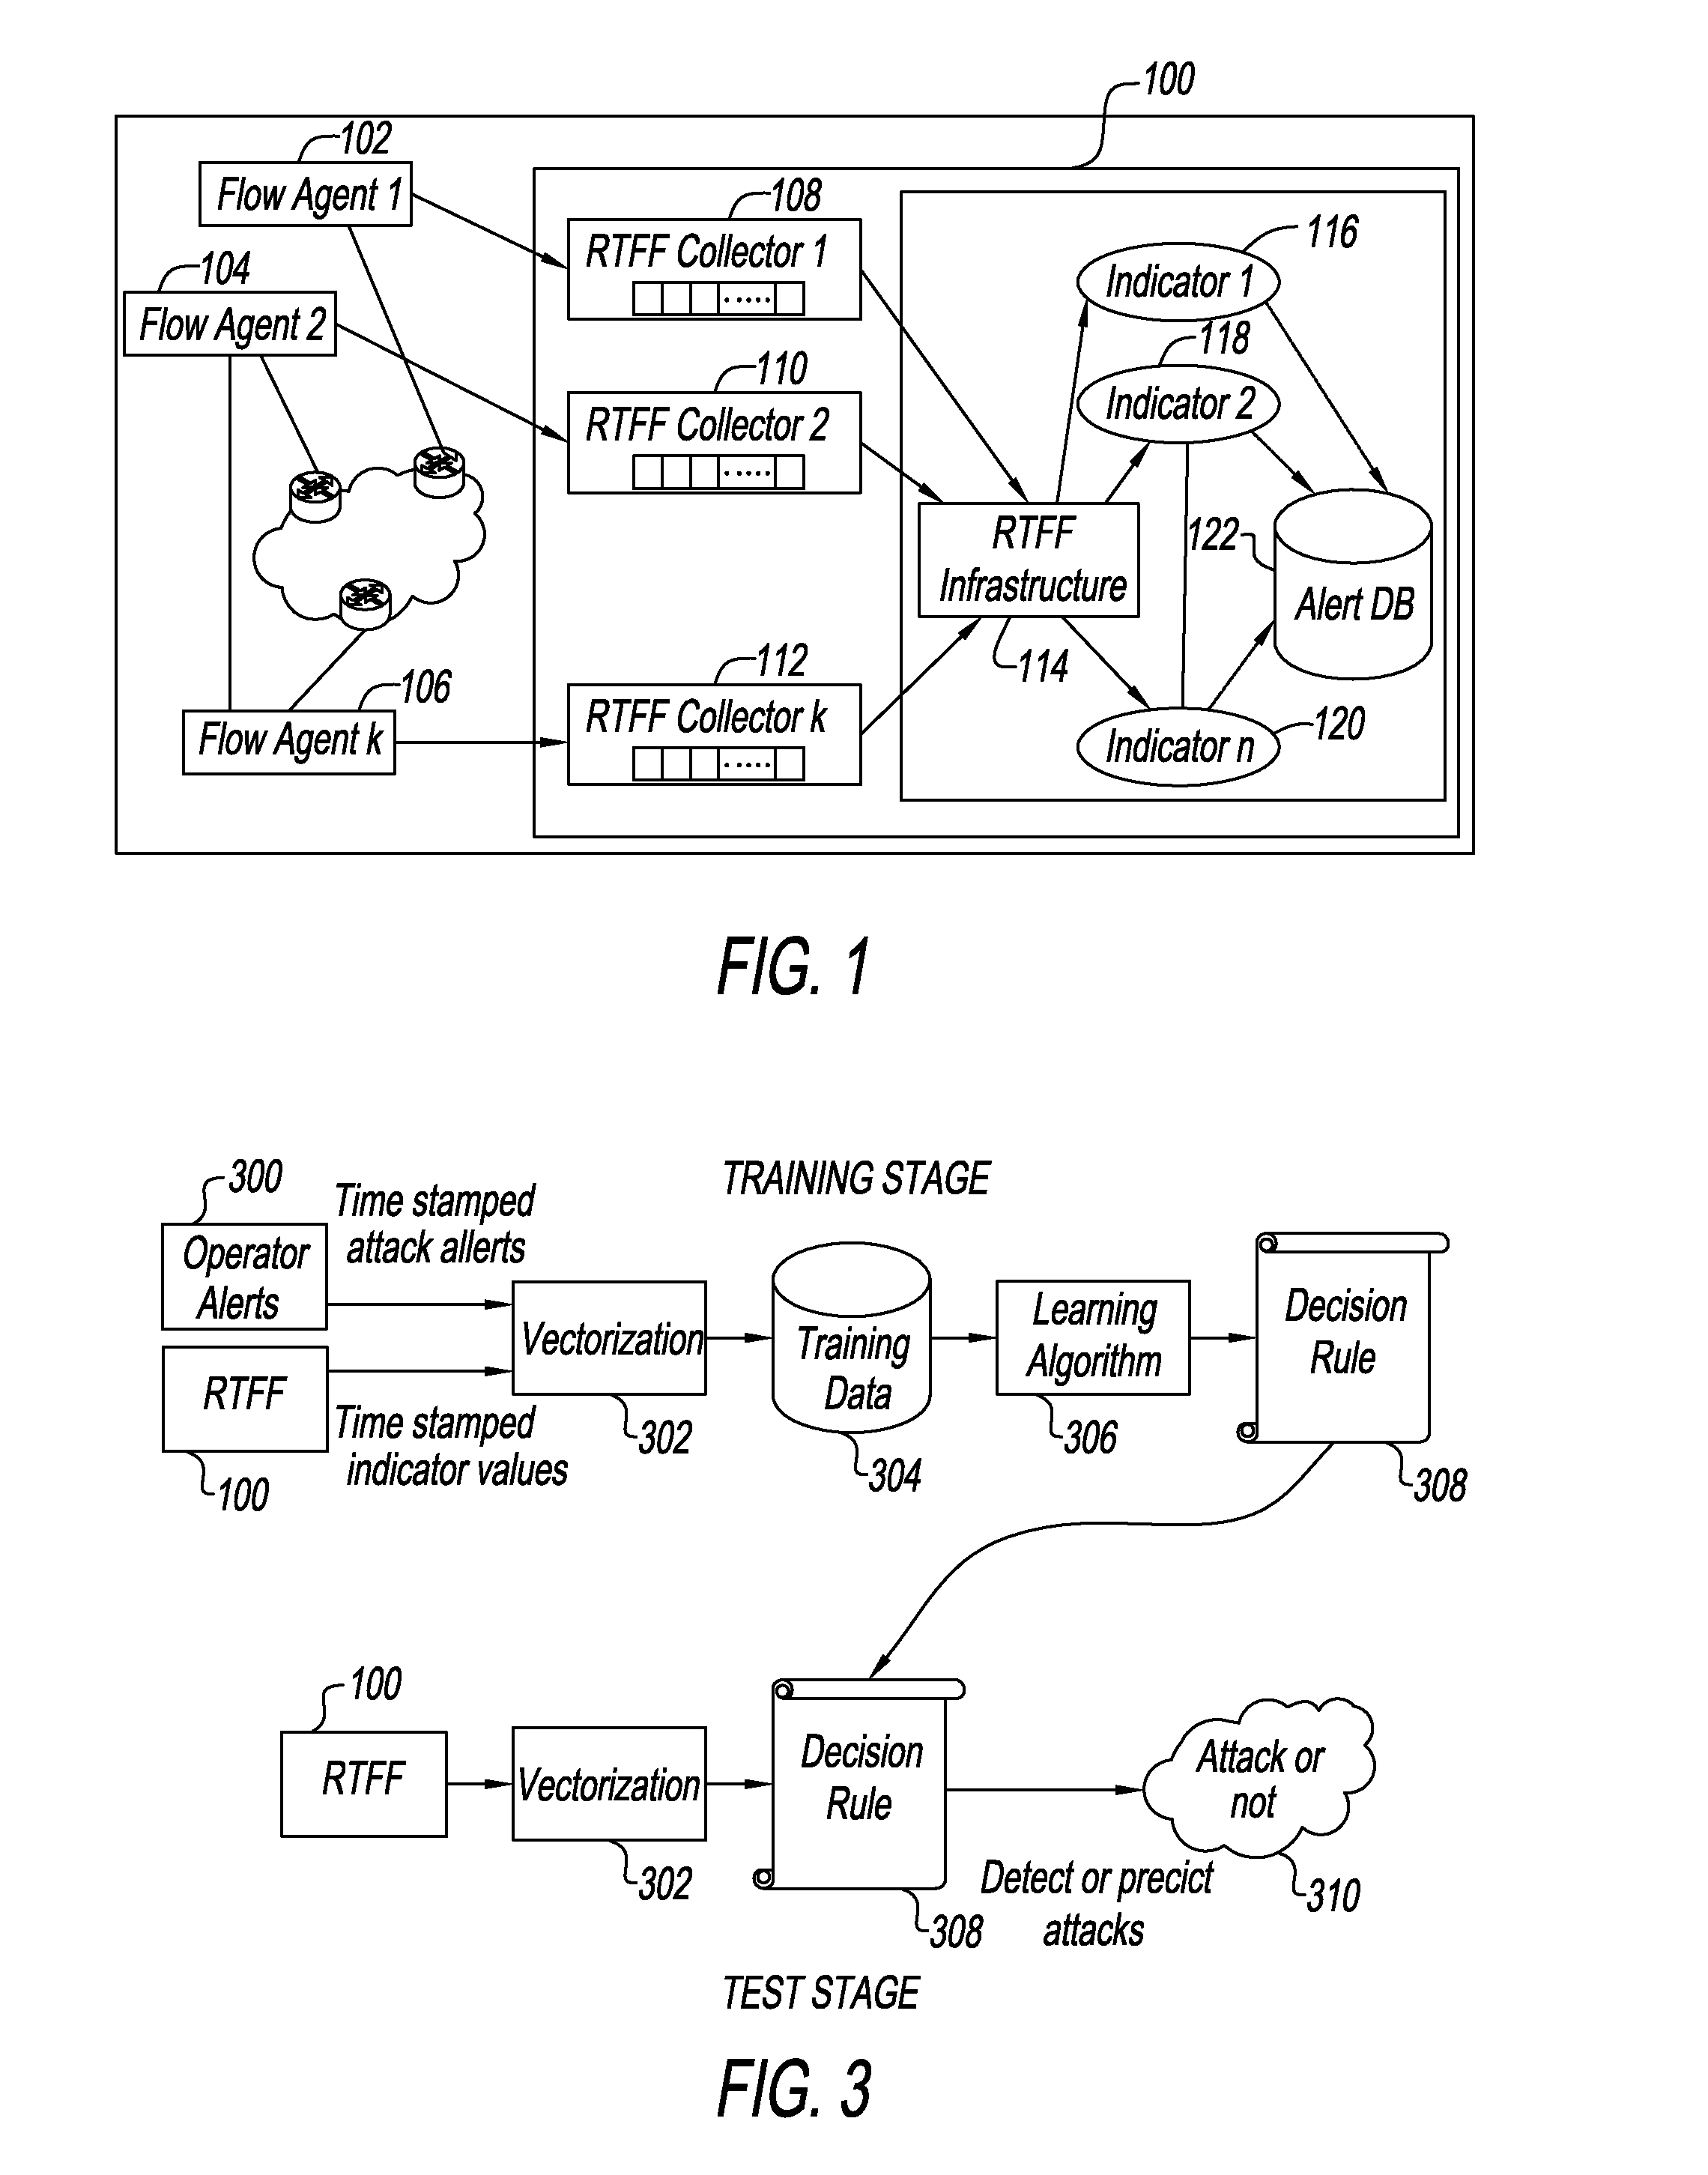 System and method for correlating historical attacks with diverse indicators to generate indicator profiles for detecting and predicting future network attacks